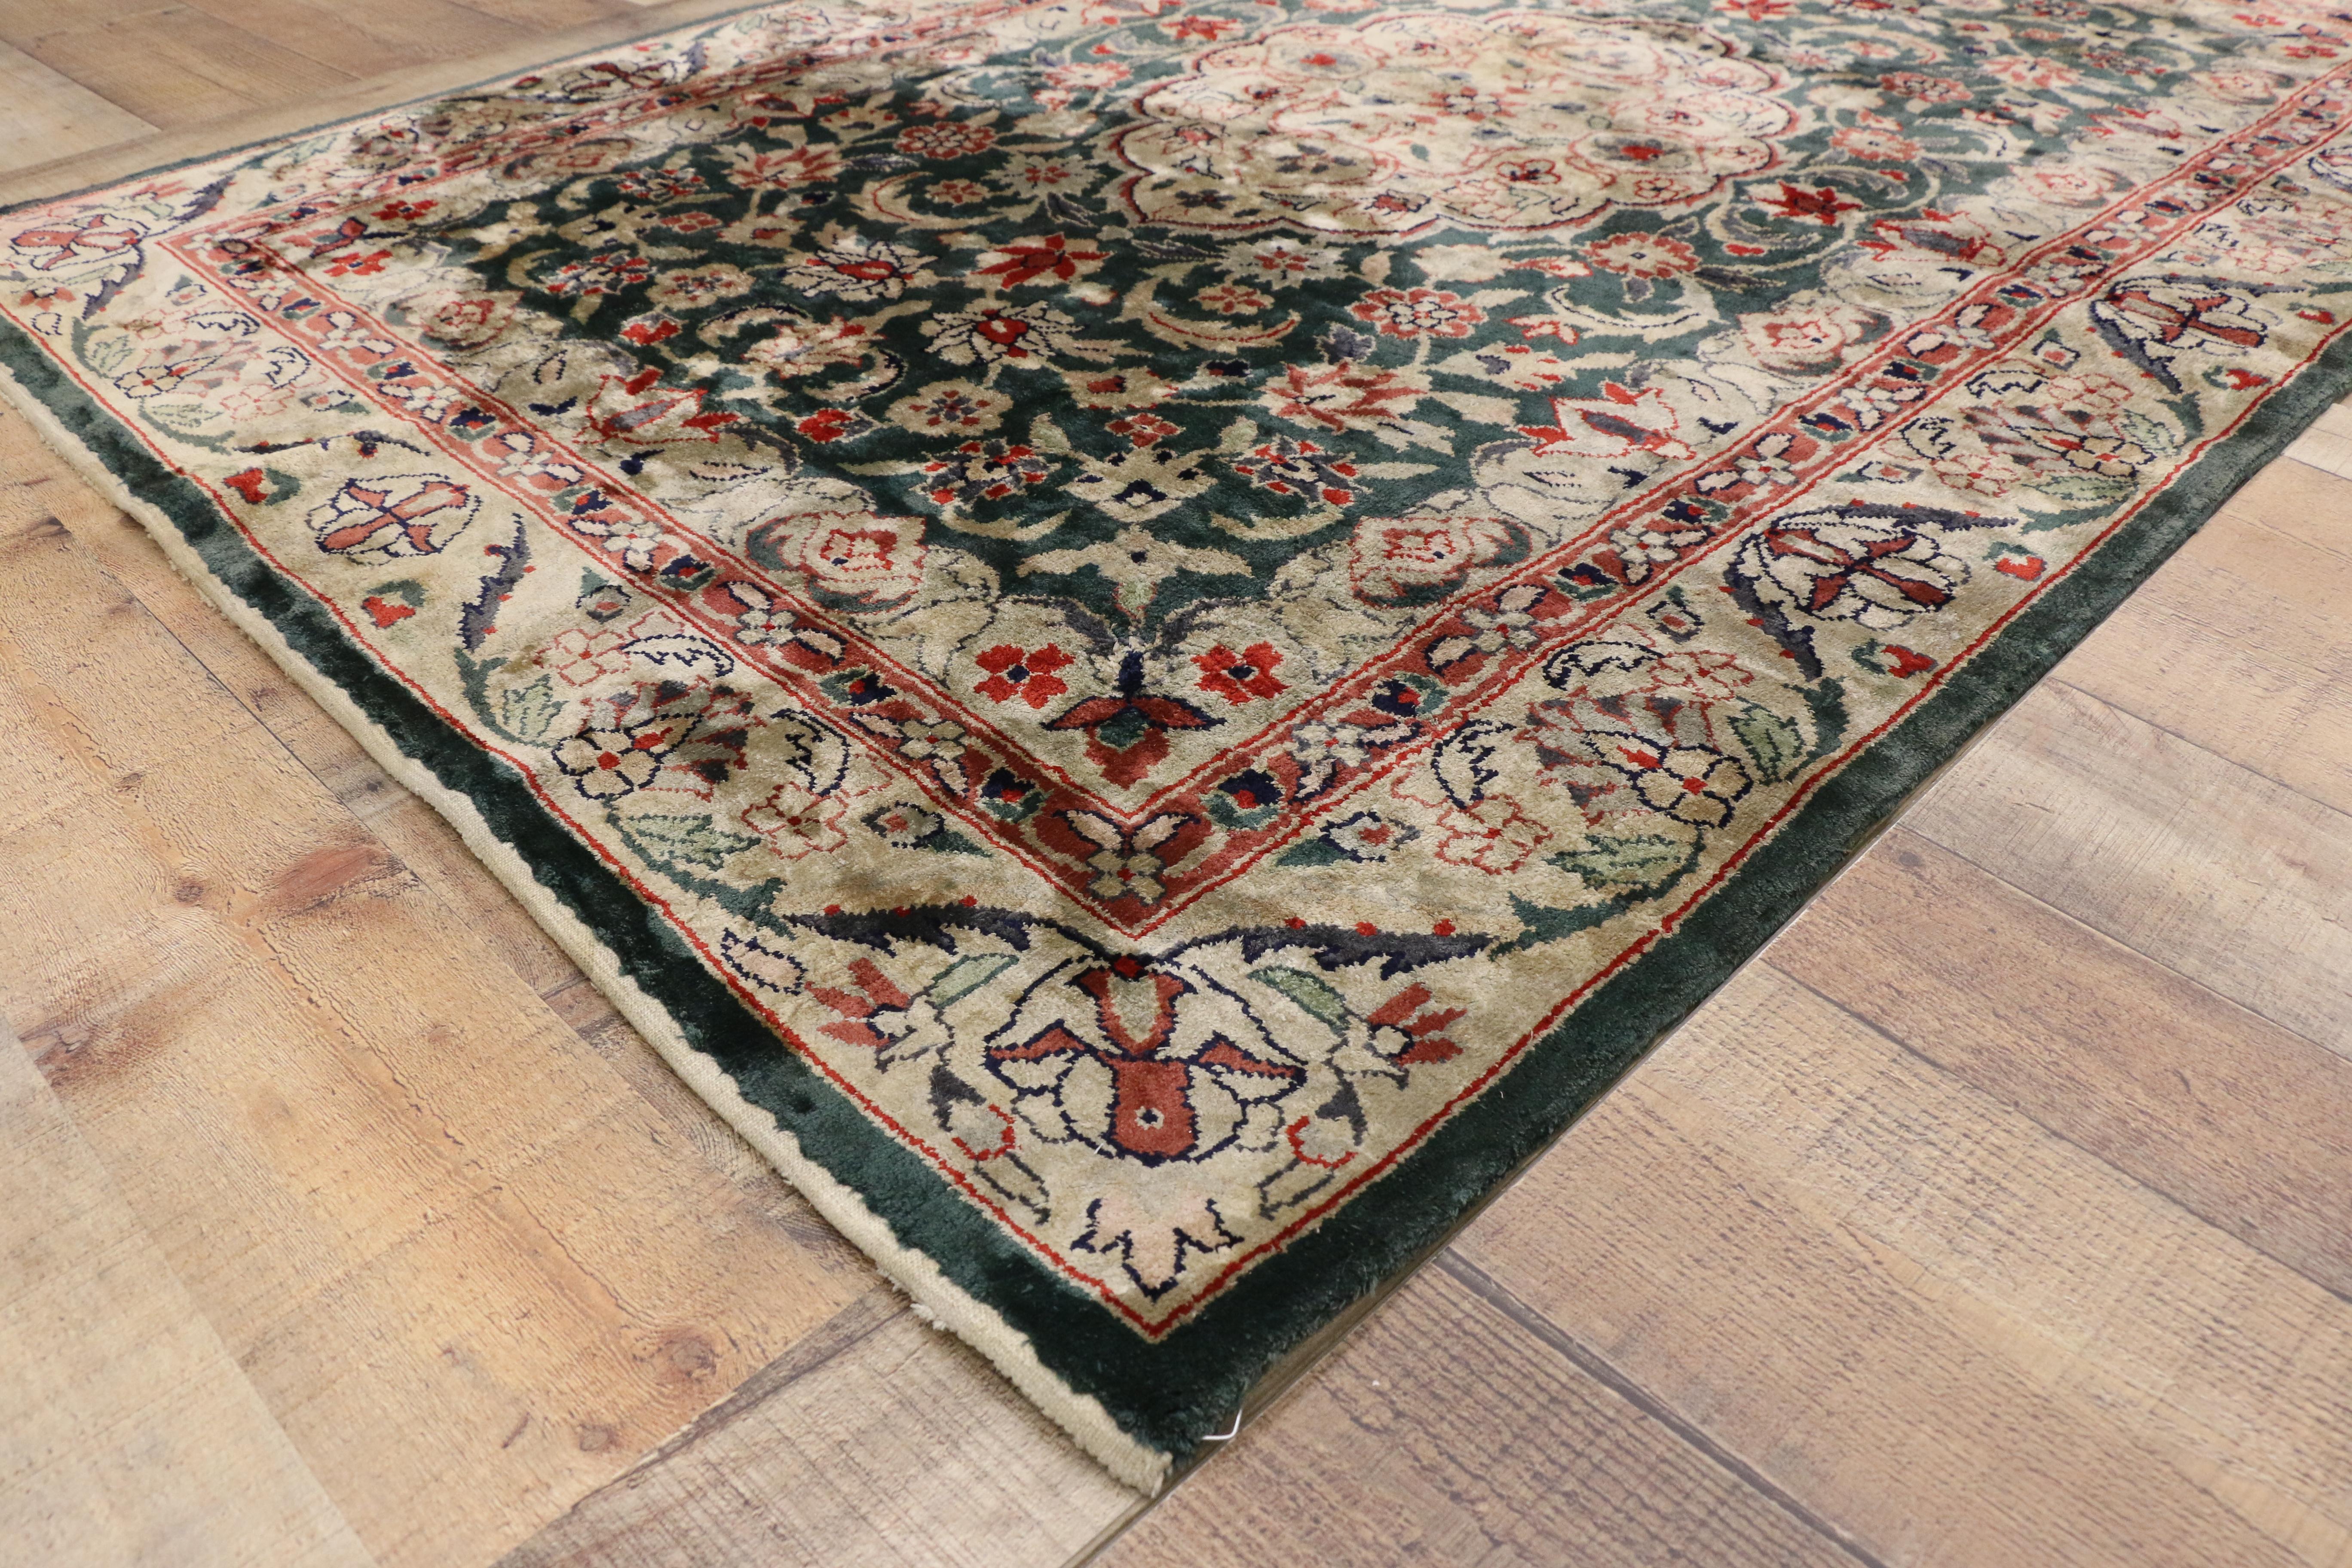 77172, vintage Persian style Chinese rug with traditional design. This Vintage Persian style chinese rug features a traditional lobed diamond medallion with elaborate floral ornament against a moss green field. Inward-facing lobed mounds extend from